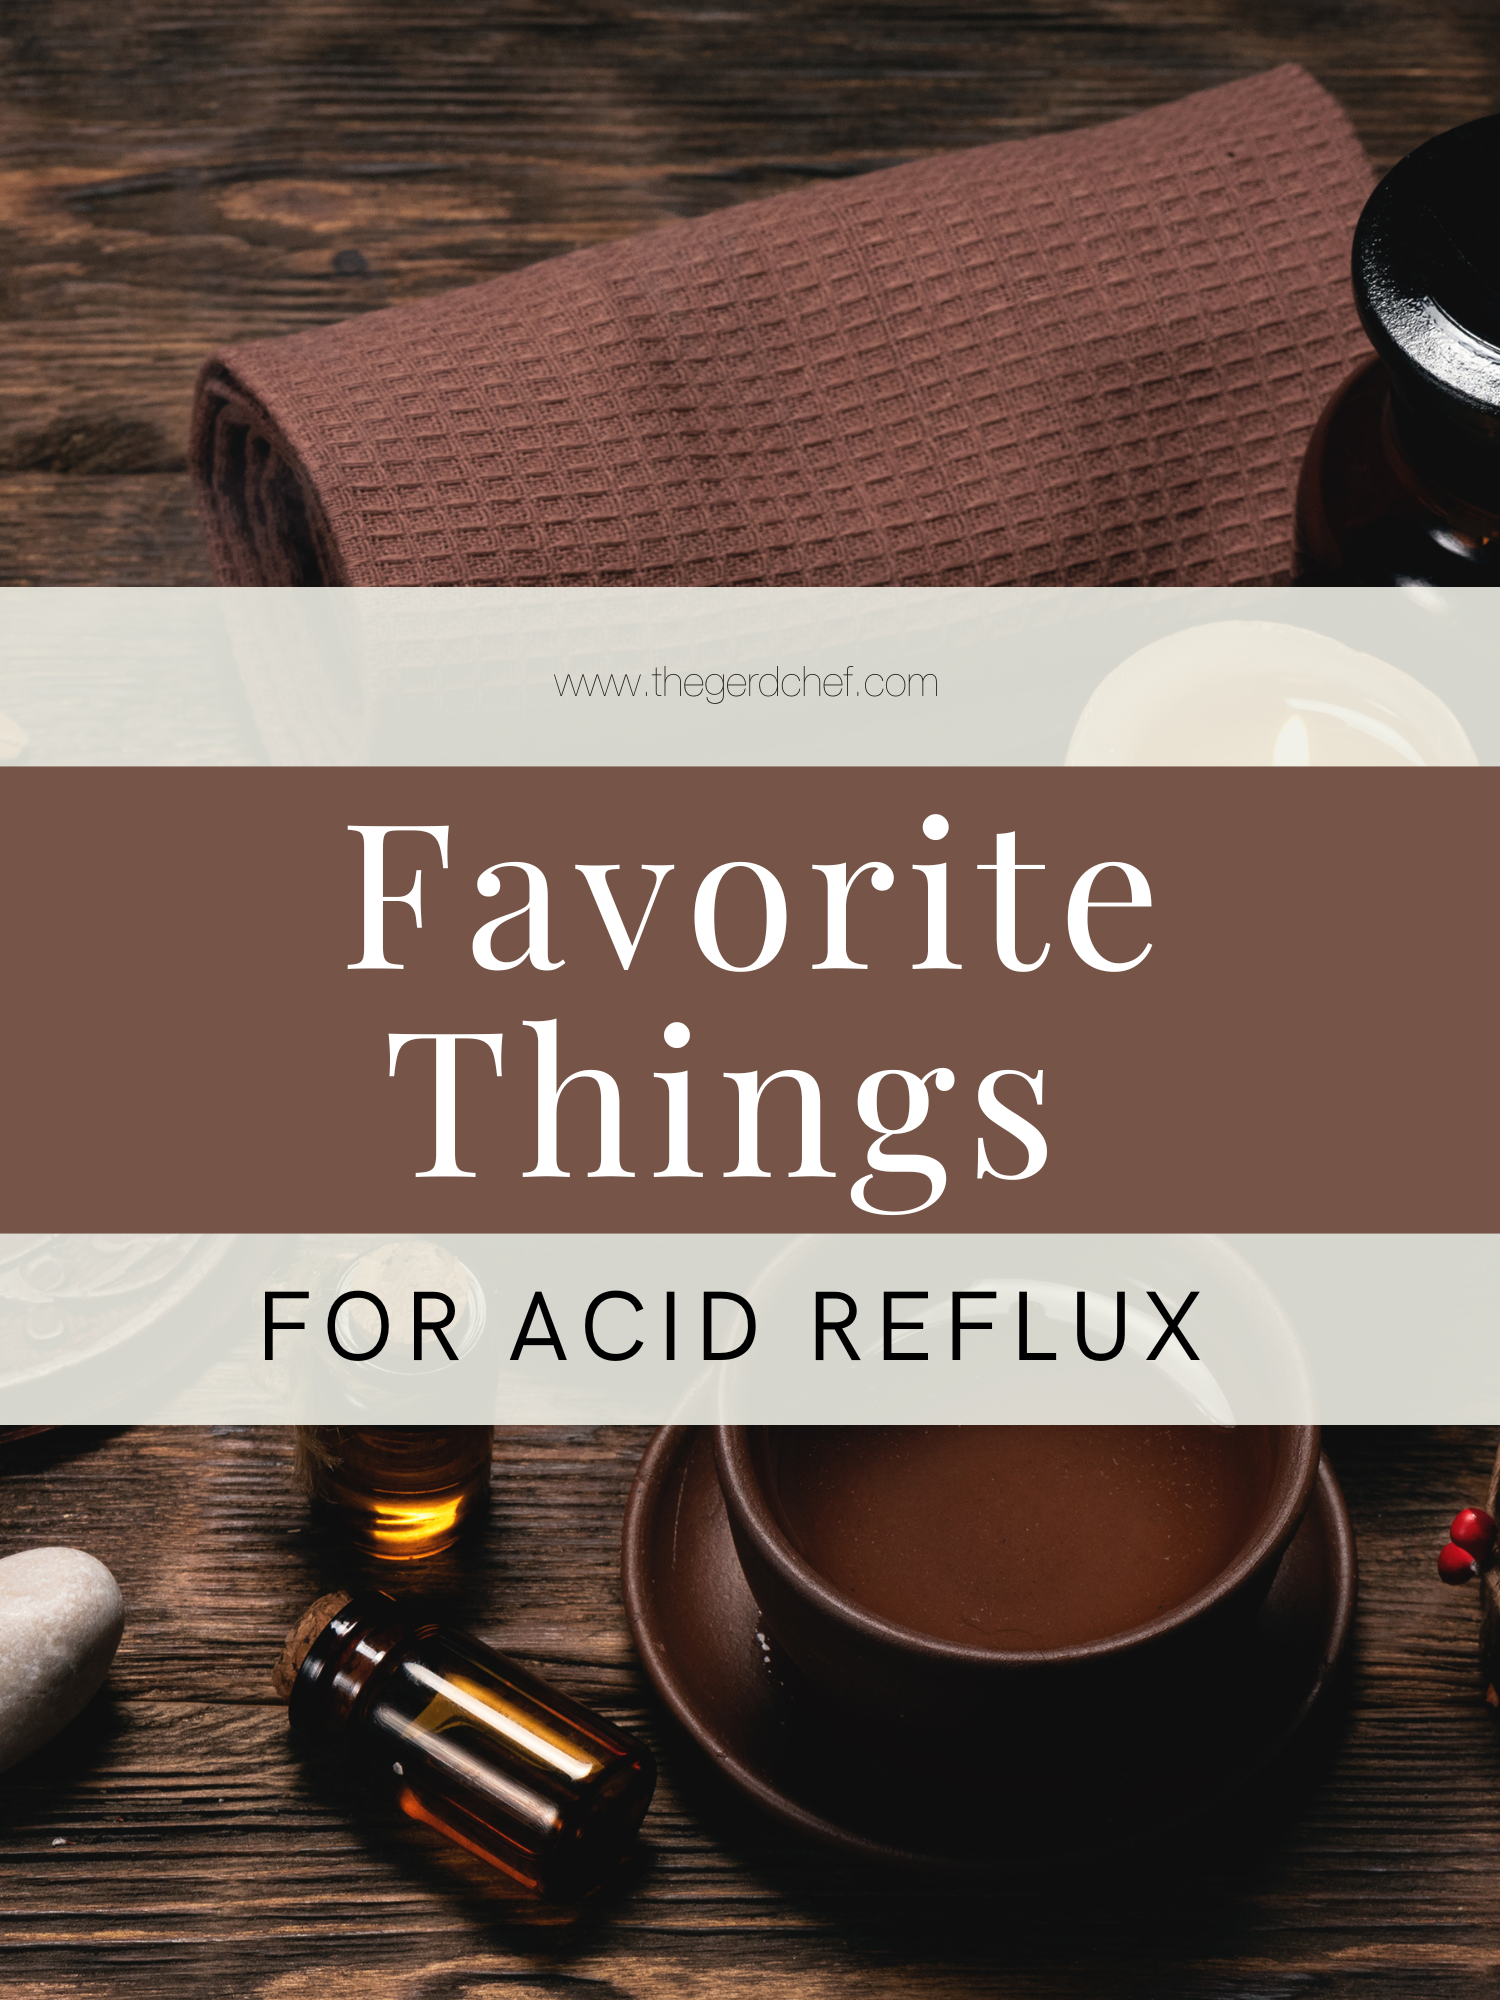 Favorite things for acid reflux